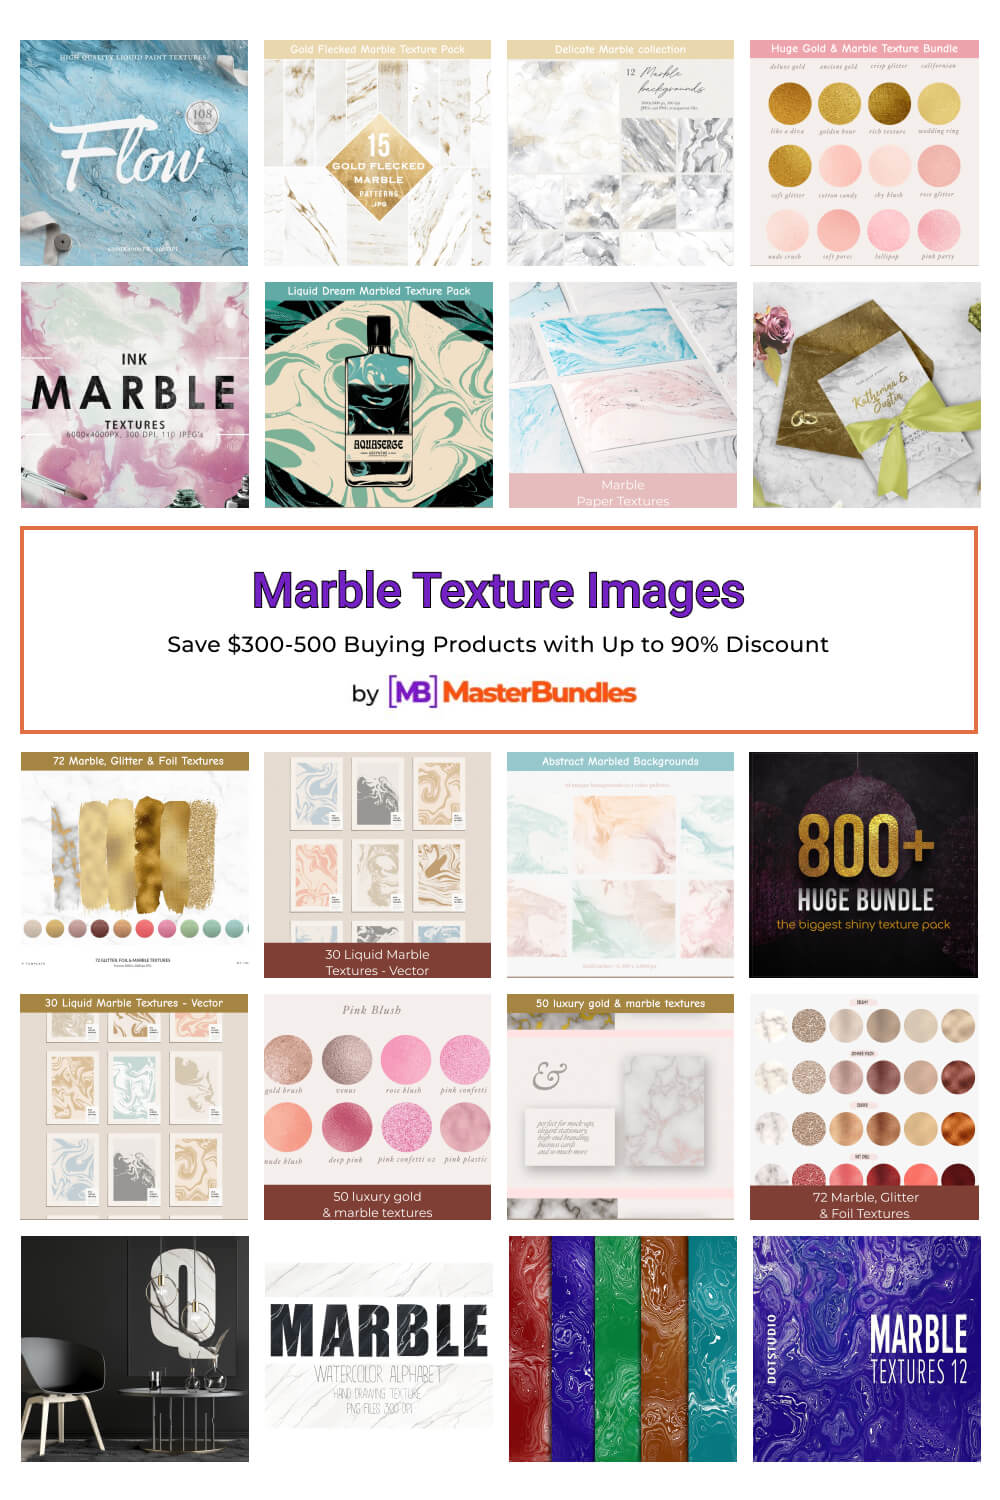 marble texture images pinterest image.